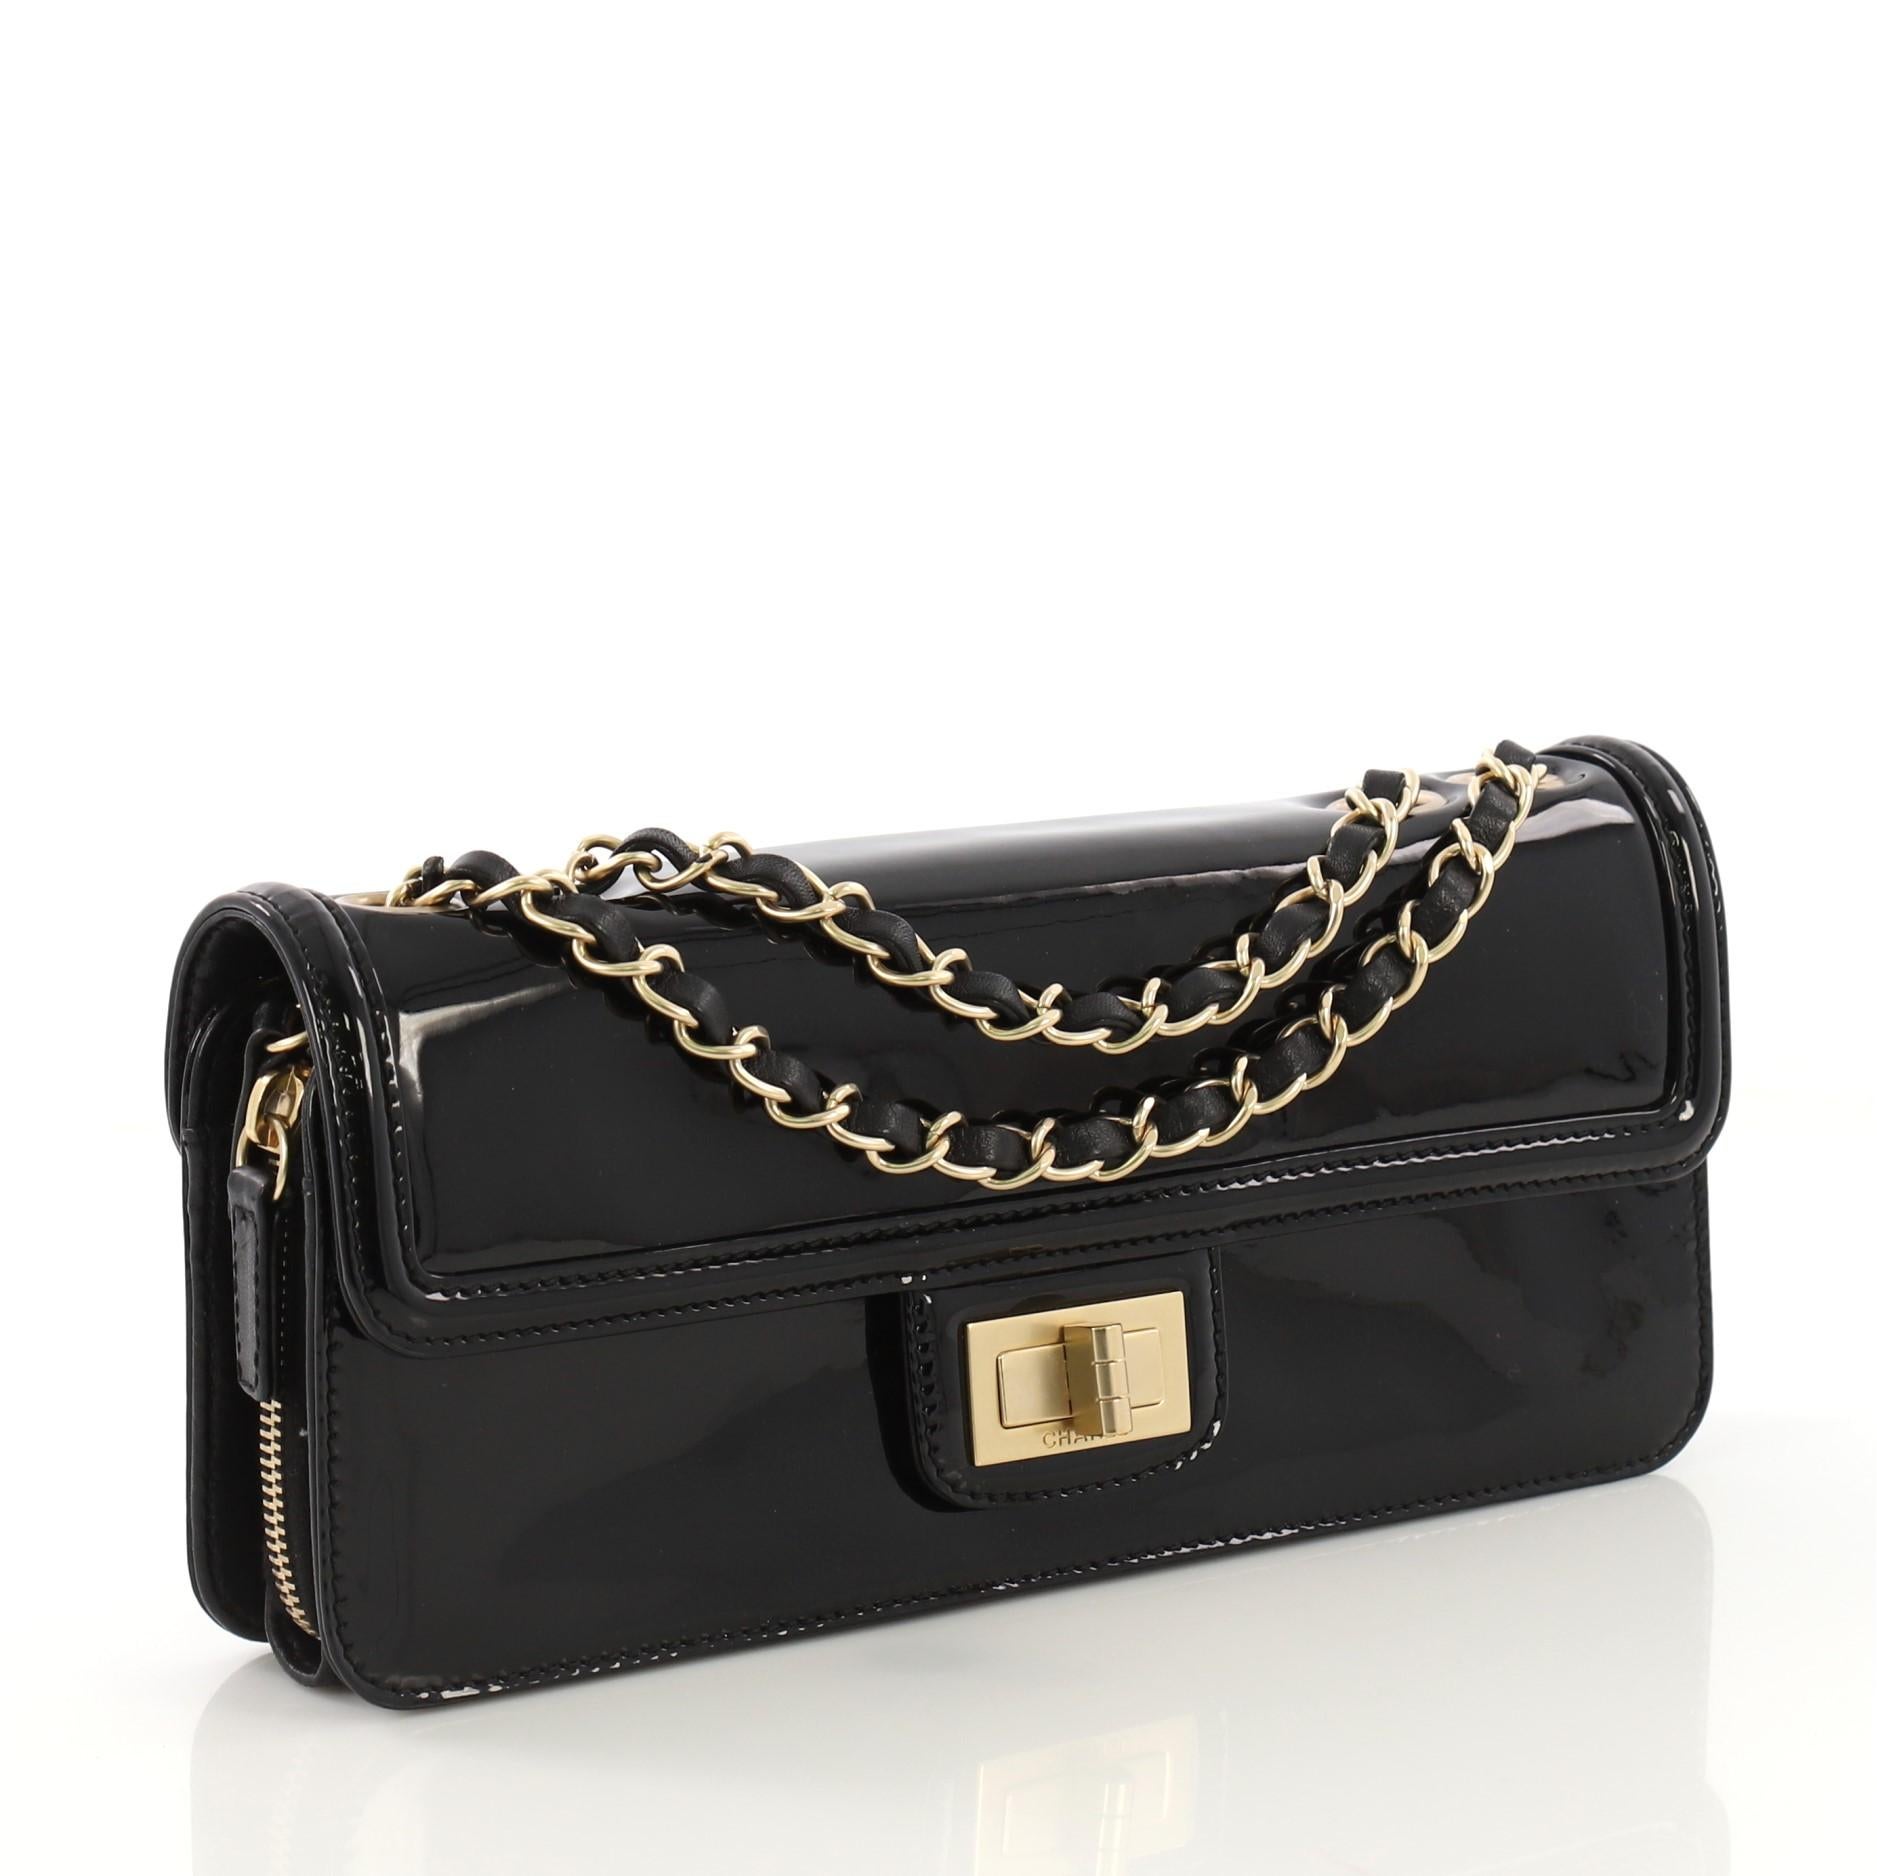 This Chanel Mademoiselle Flap Bag Patent East West, crafted from black patent leather east west, features woven-in leather chain strap and matte gold-tone hardware. Its mademoiselle turn-lock closure opens to a light pink fabric interior with middle